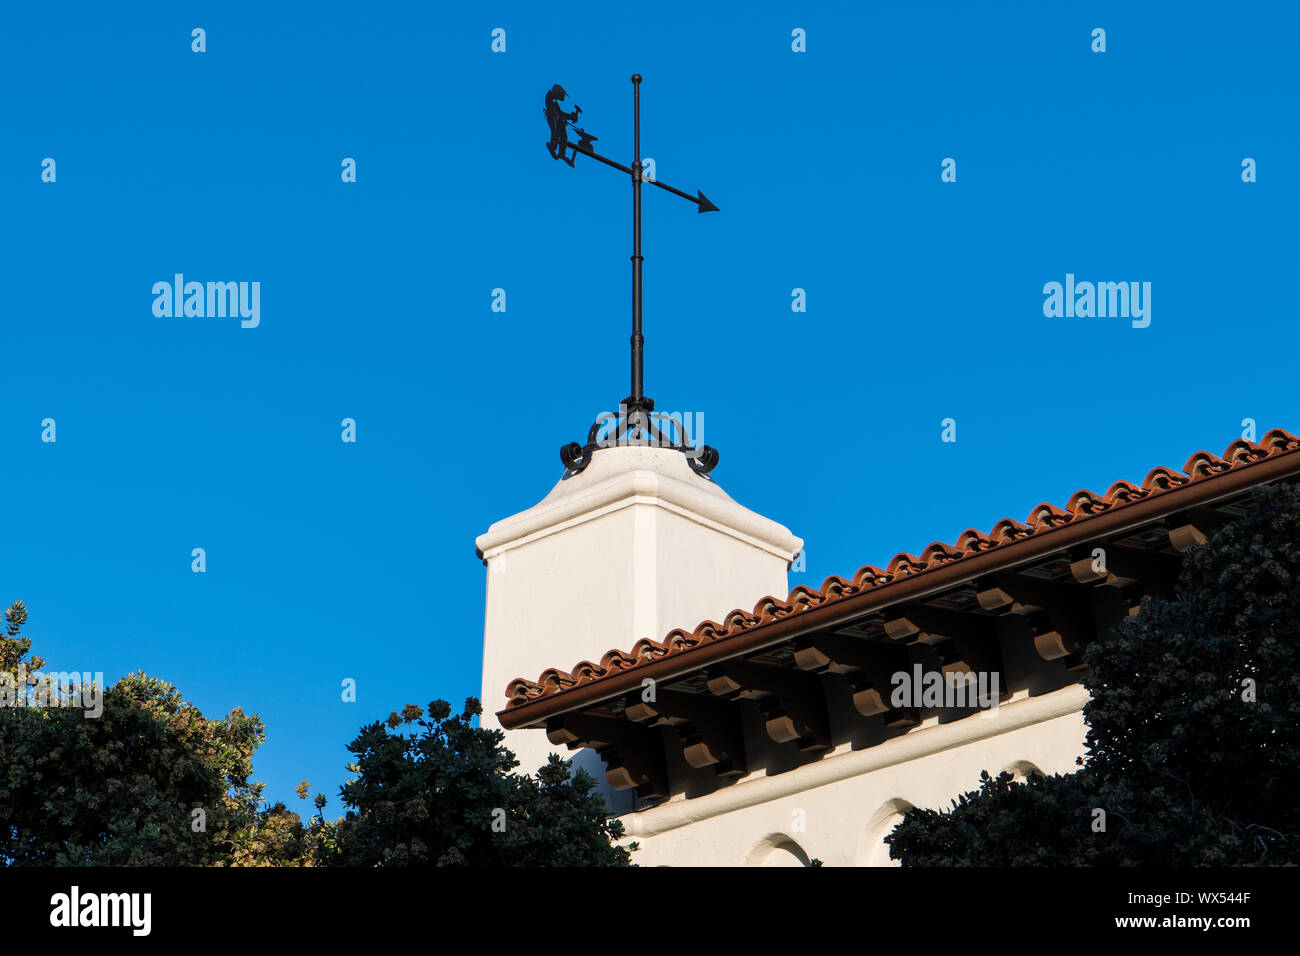 Weather vane on top of a white Spanish Colonial Revival architecture style building with a red tile roof - Santa Barbara, California Stock Photo